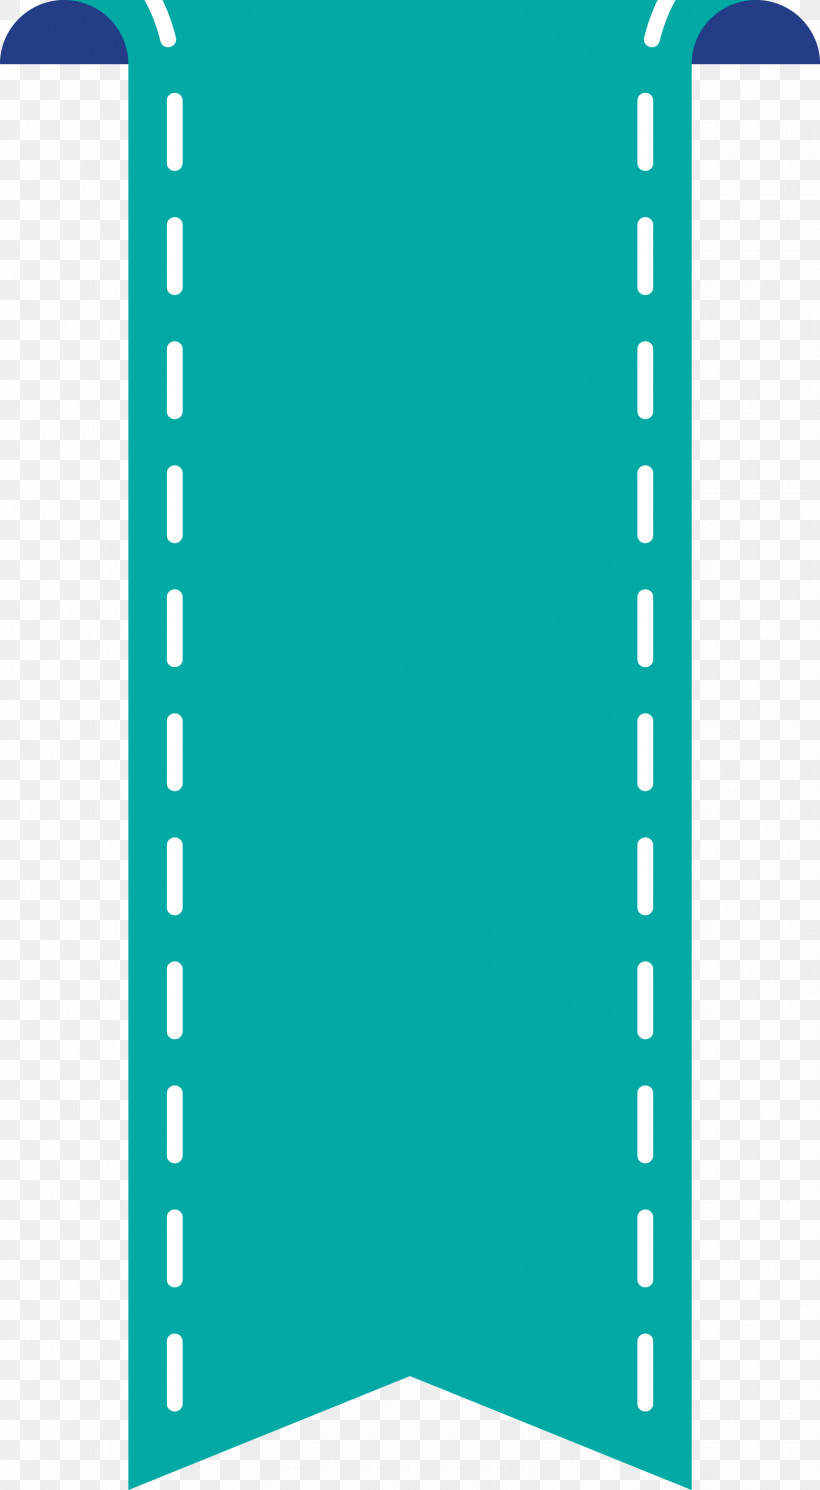 Bookmark Ribbon, PNG, 1650x3000px, Bookmark Ribbon, Rectangle, Teal, Turquoise Download Free